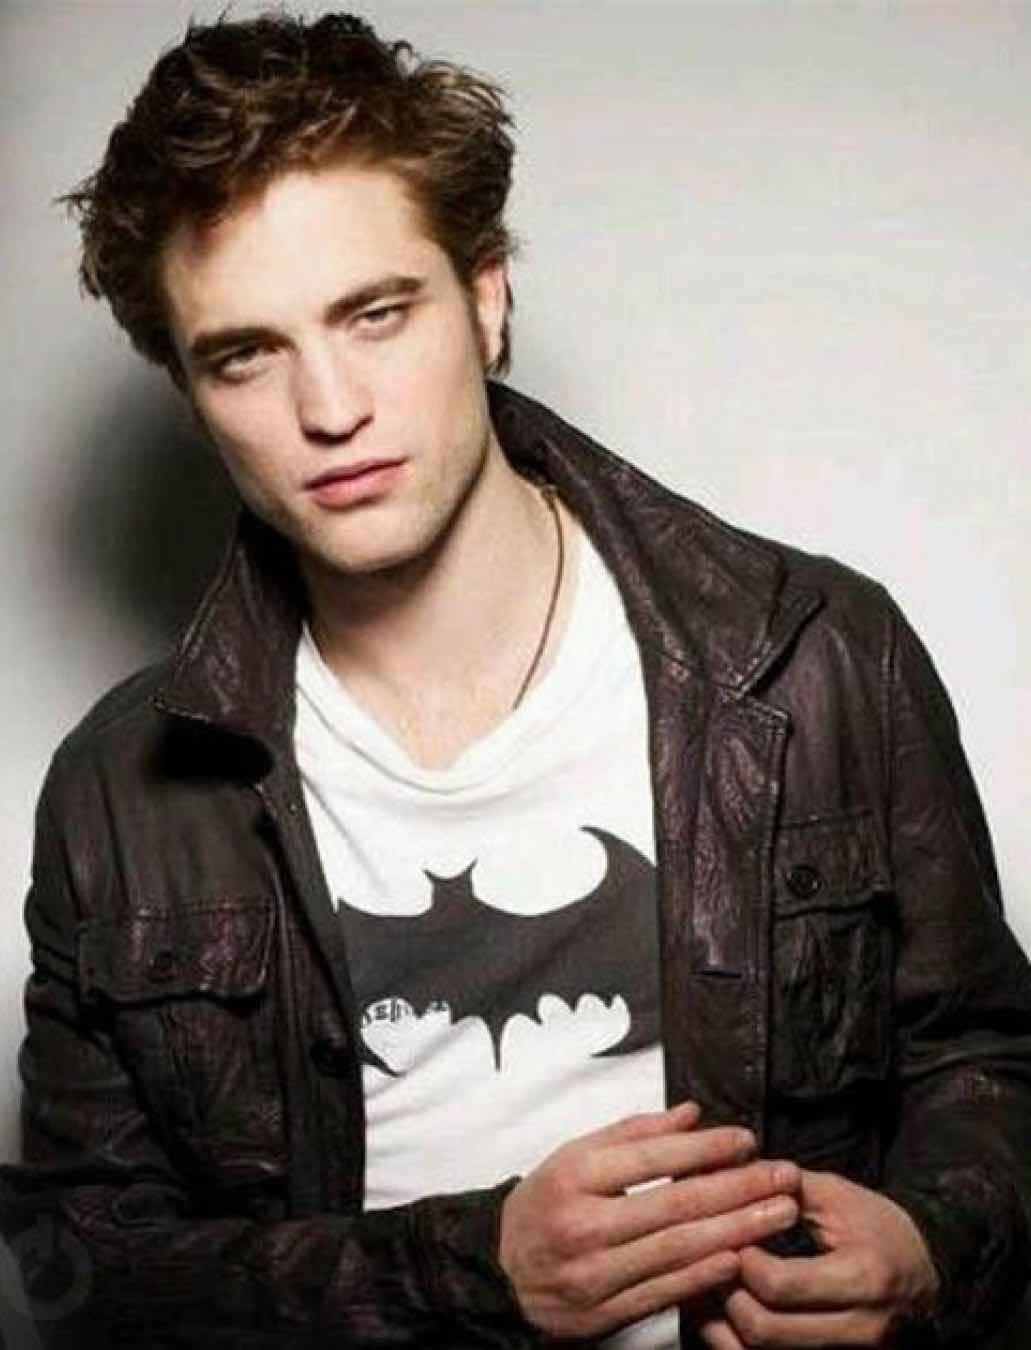 Here’s why we think the performance by Robert Pattinson in 'Good Time' proves he's the best casting choice for the upcoming movie 'The Batman'.